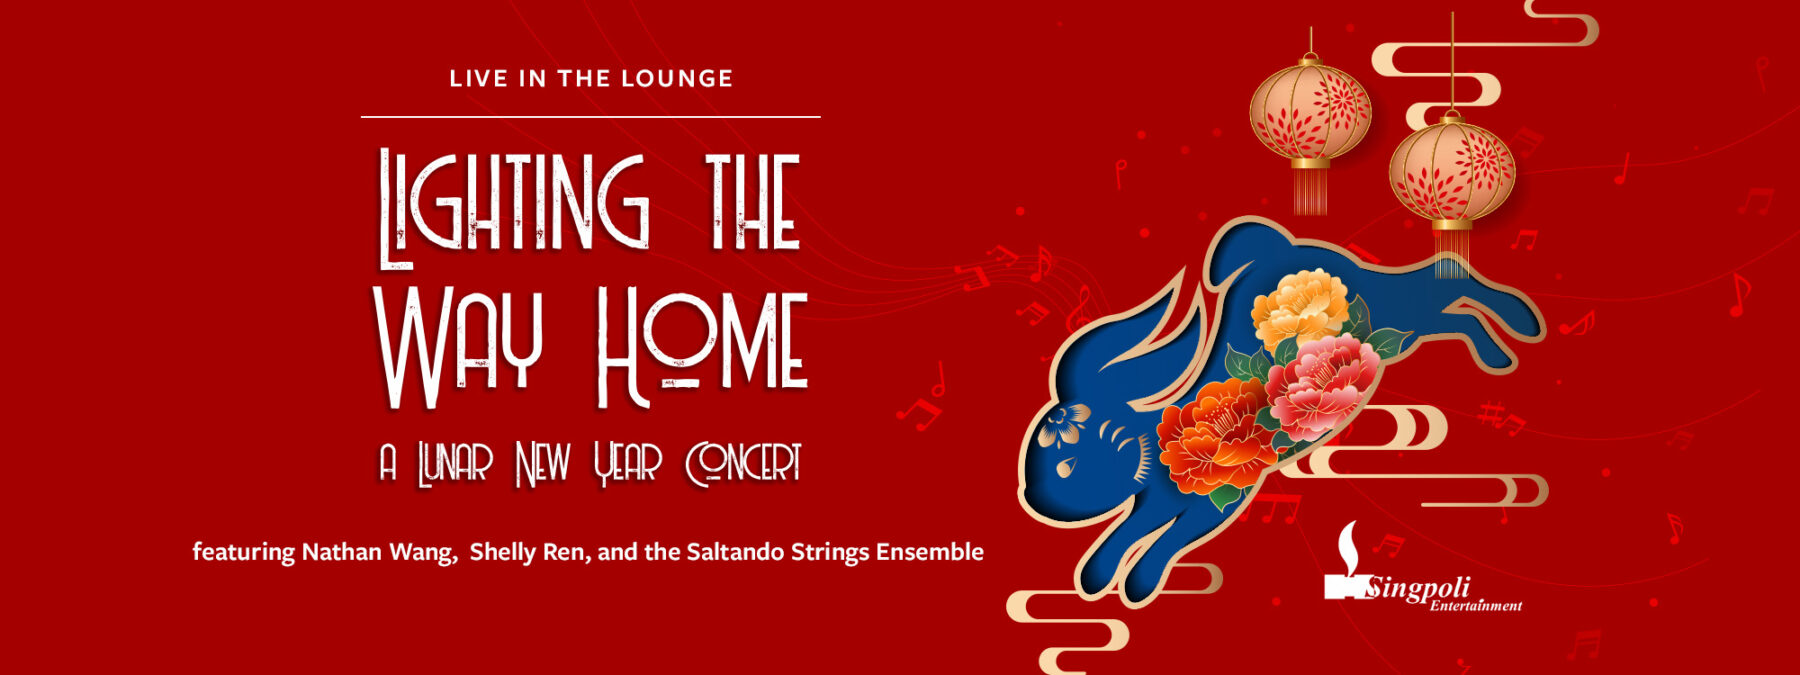 Live in the Lounge: Lighting the Way Home, a Lunar New Year Concert